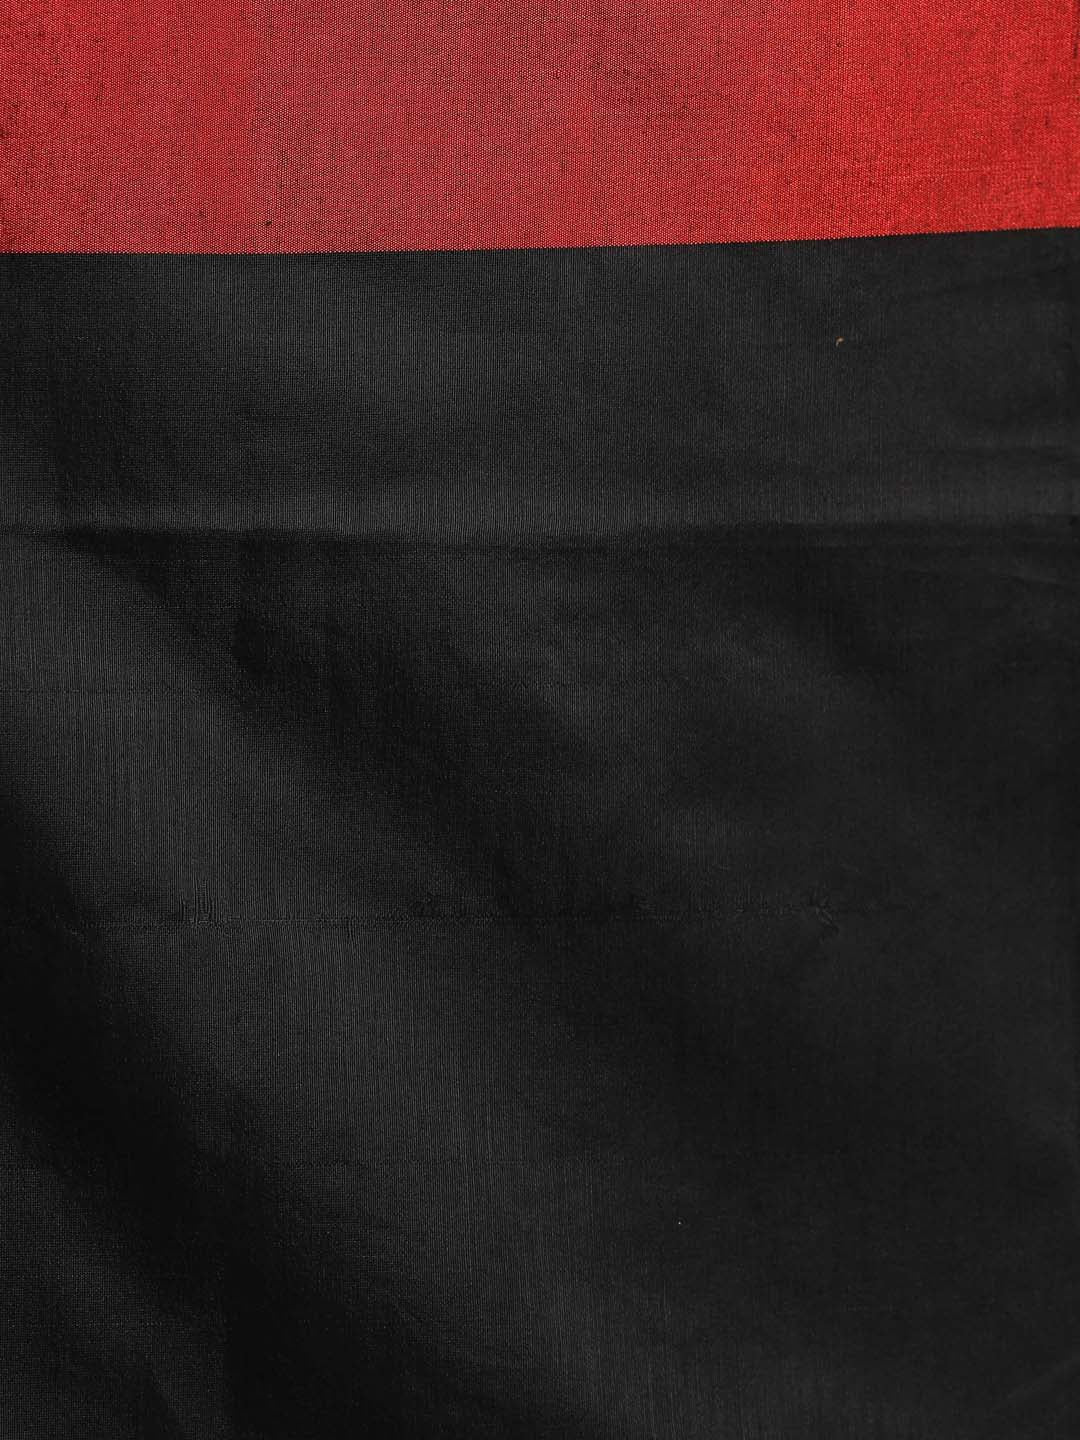 Indethnic Black and red Solid Colour Blocked Saree - Saree Detail View